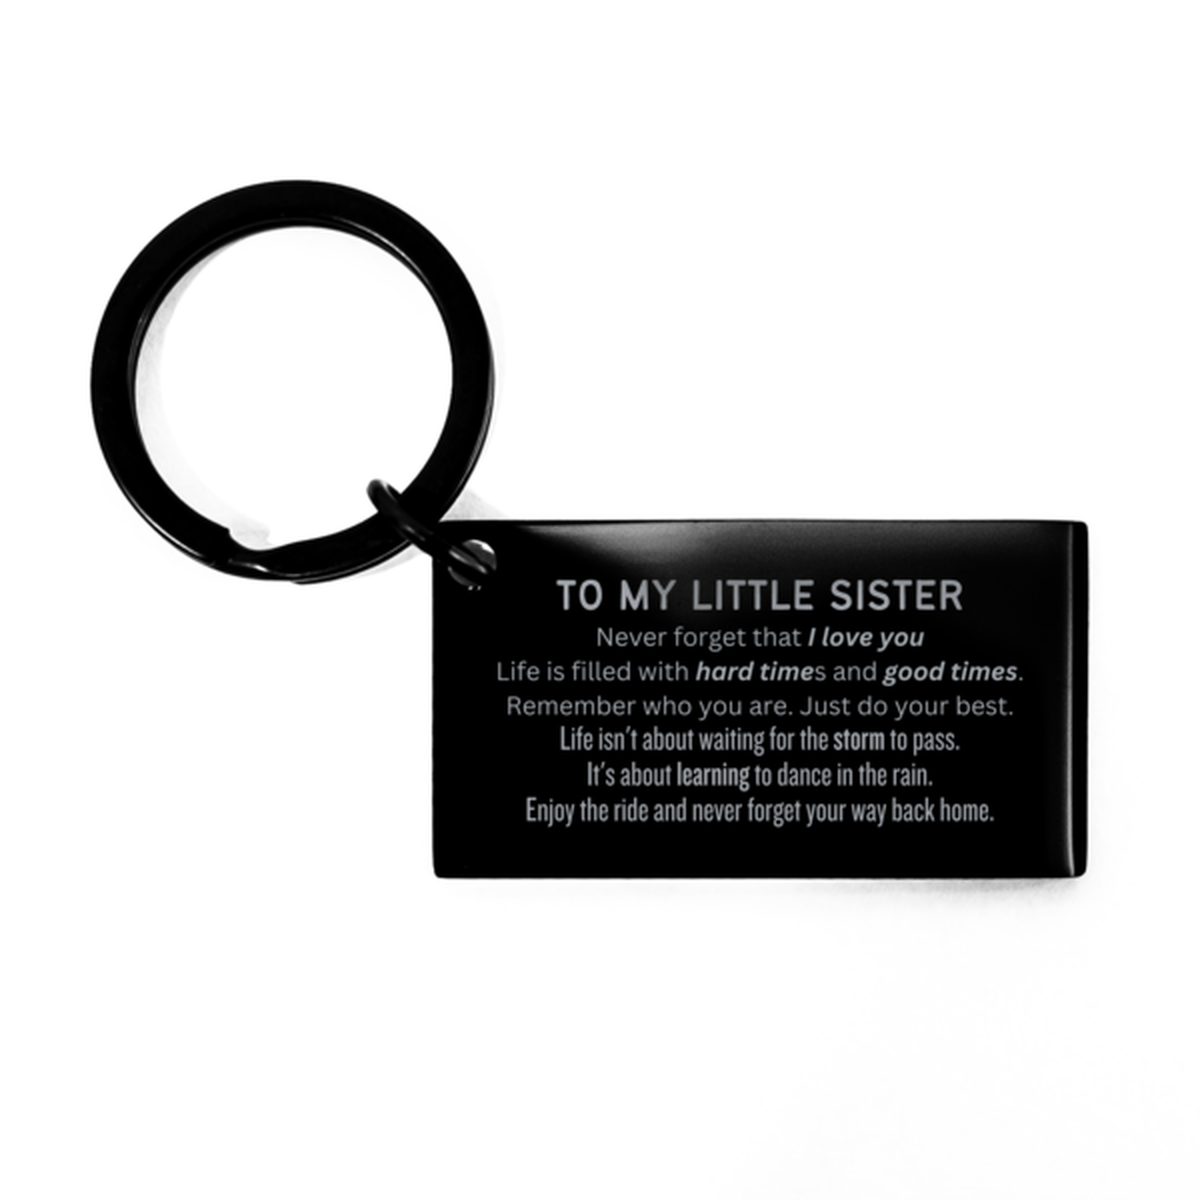 Christmas Little Sister Keychain Gifts, To My Little Sister Birthday Thank You Gifts For Little Sister, Graduation Unique Gifts For Little Sister To My Little Sister Never forget that I love you life is filled with hard times and good times. Remember who